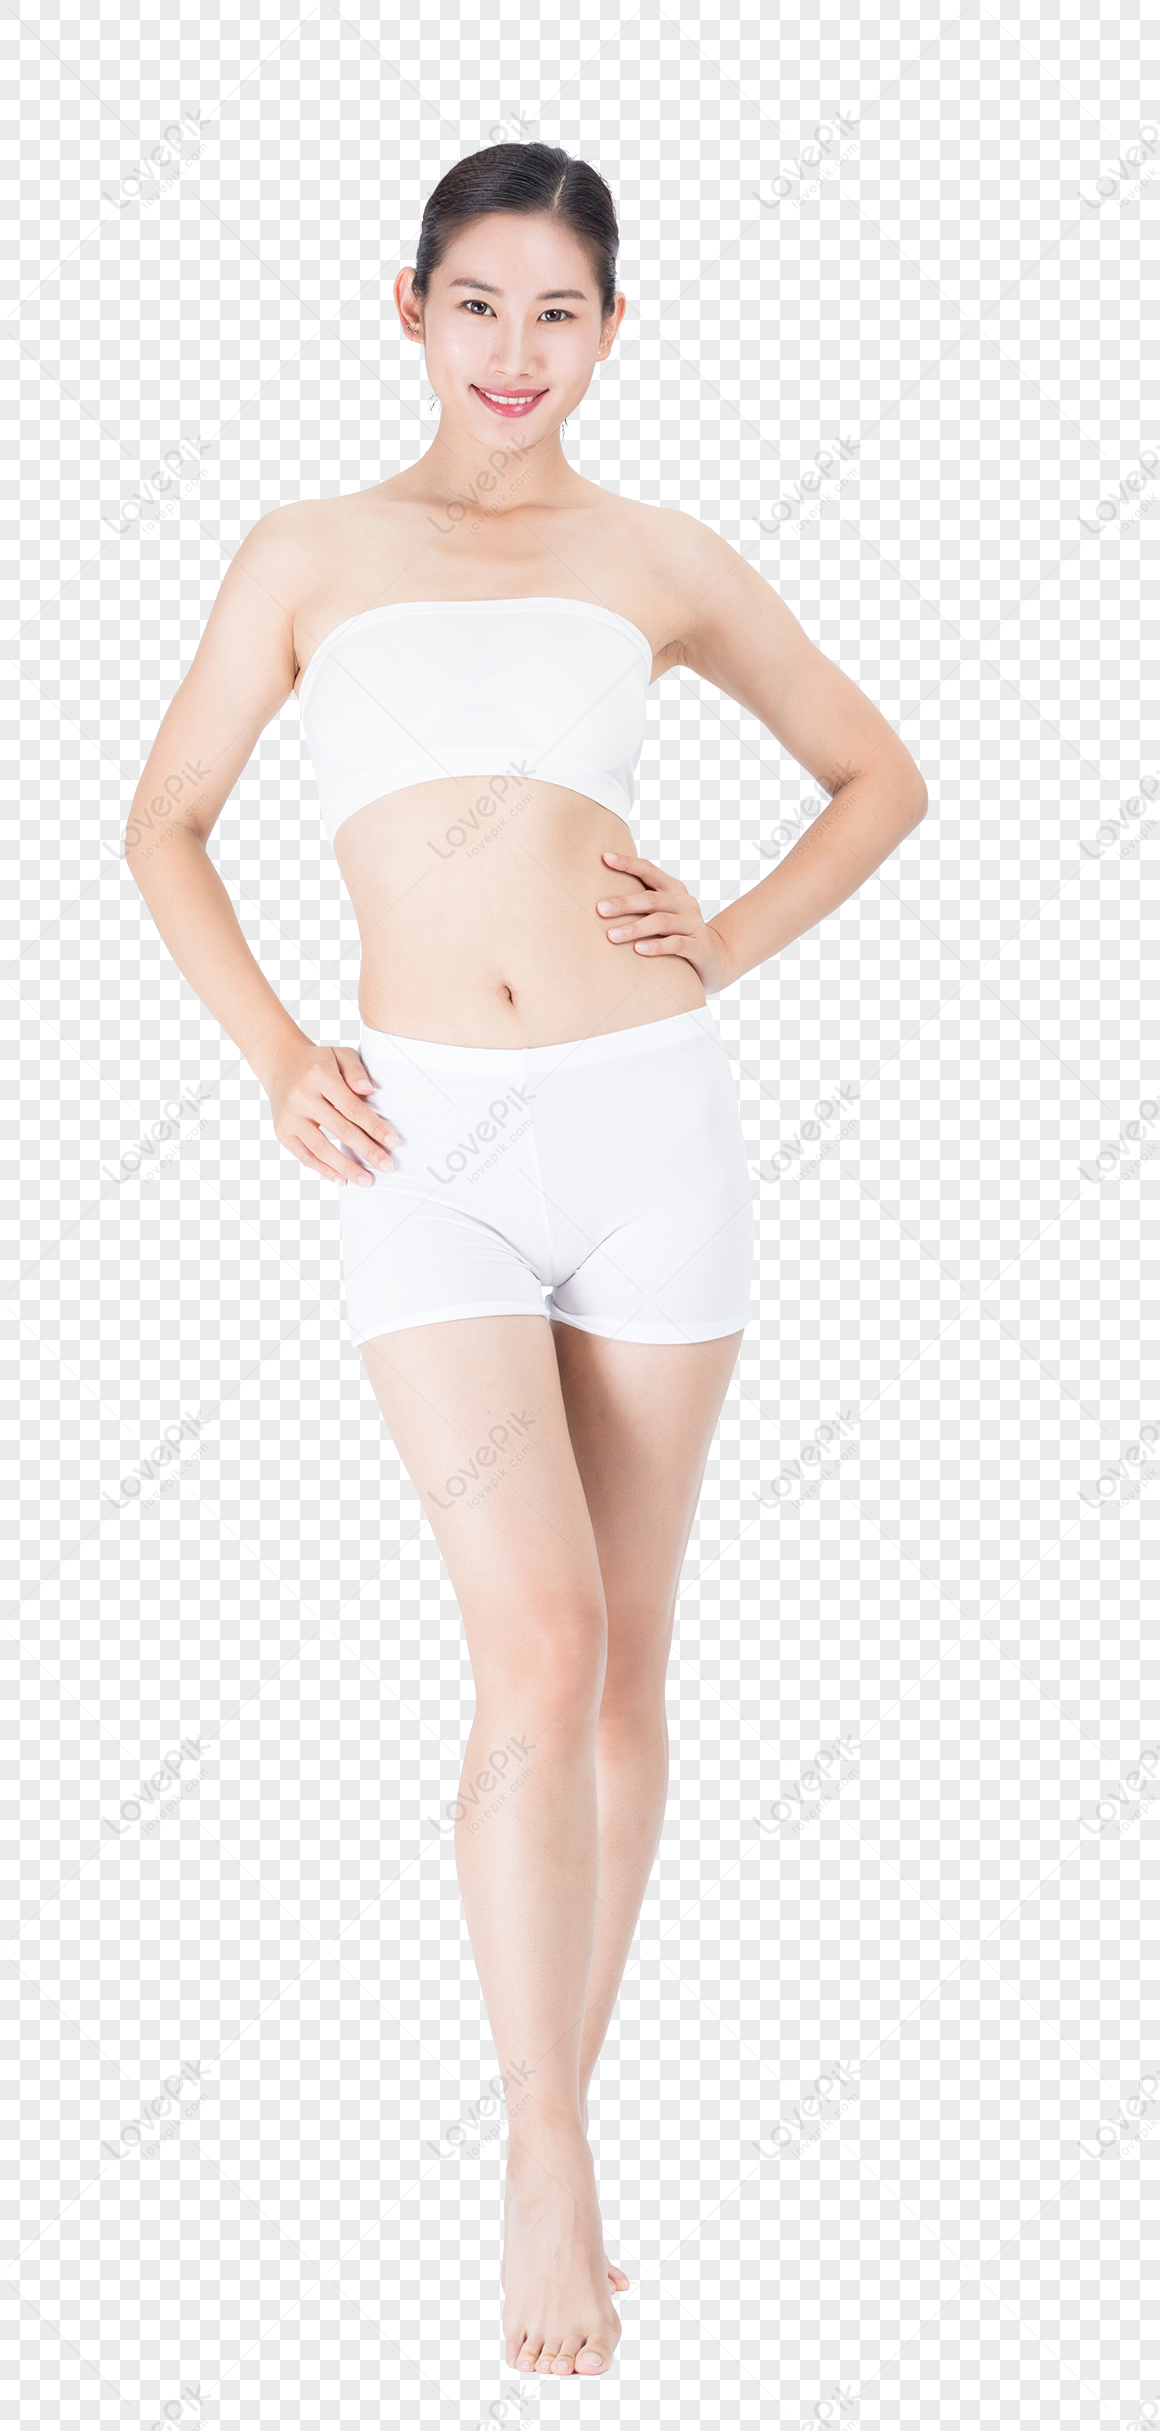 Beauty body and body presentation, white woman, woman young, standing woman png transparent image